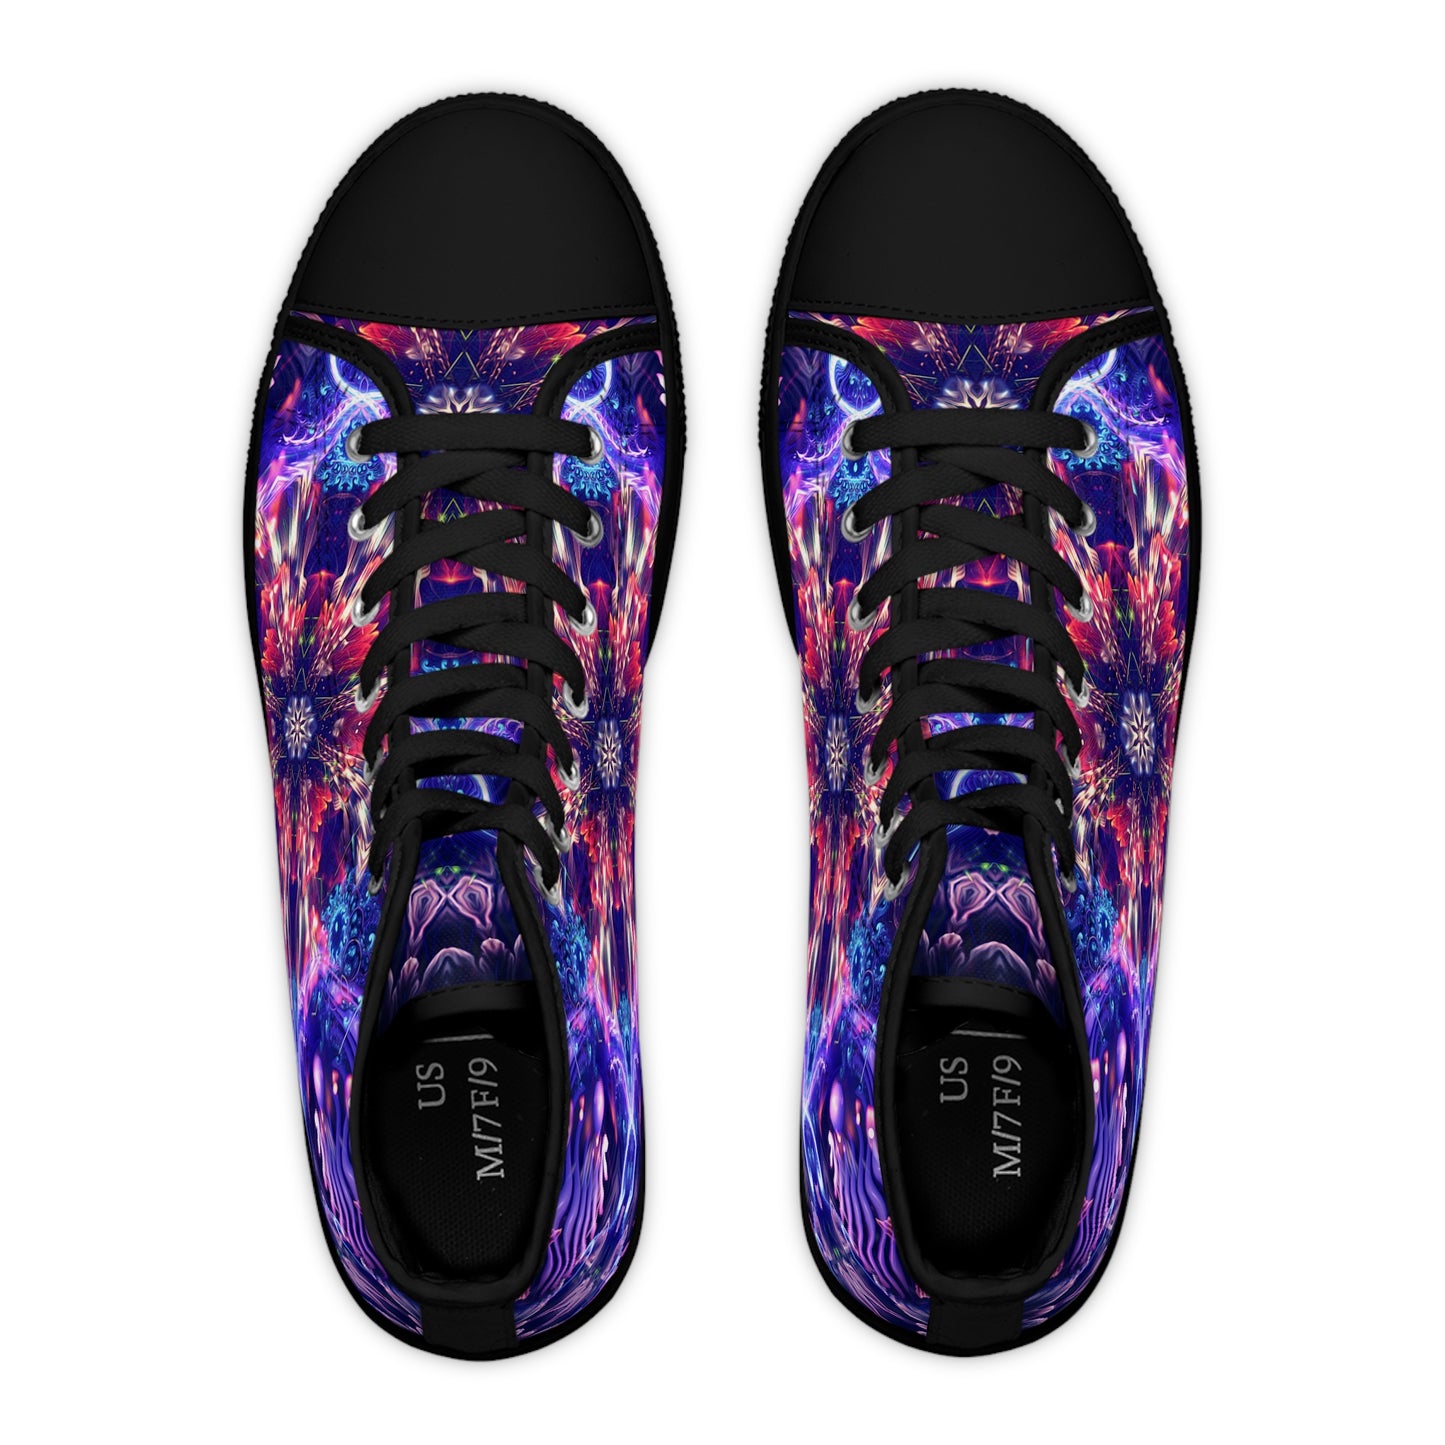 "Flow State" WOMEN'S HIGH TOP SNEAKERS